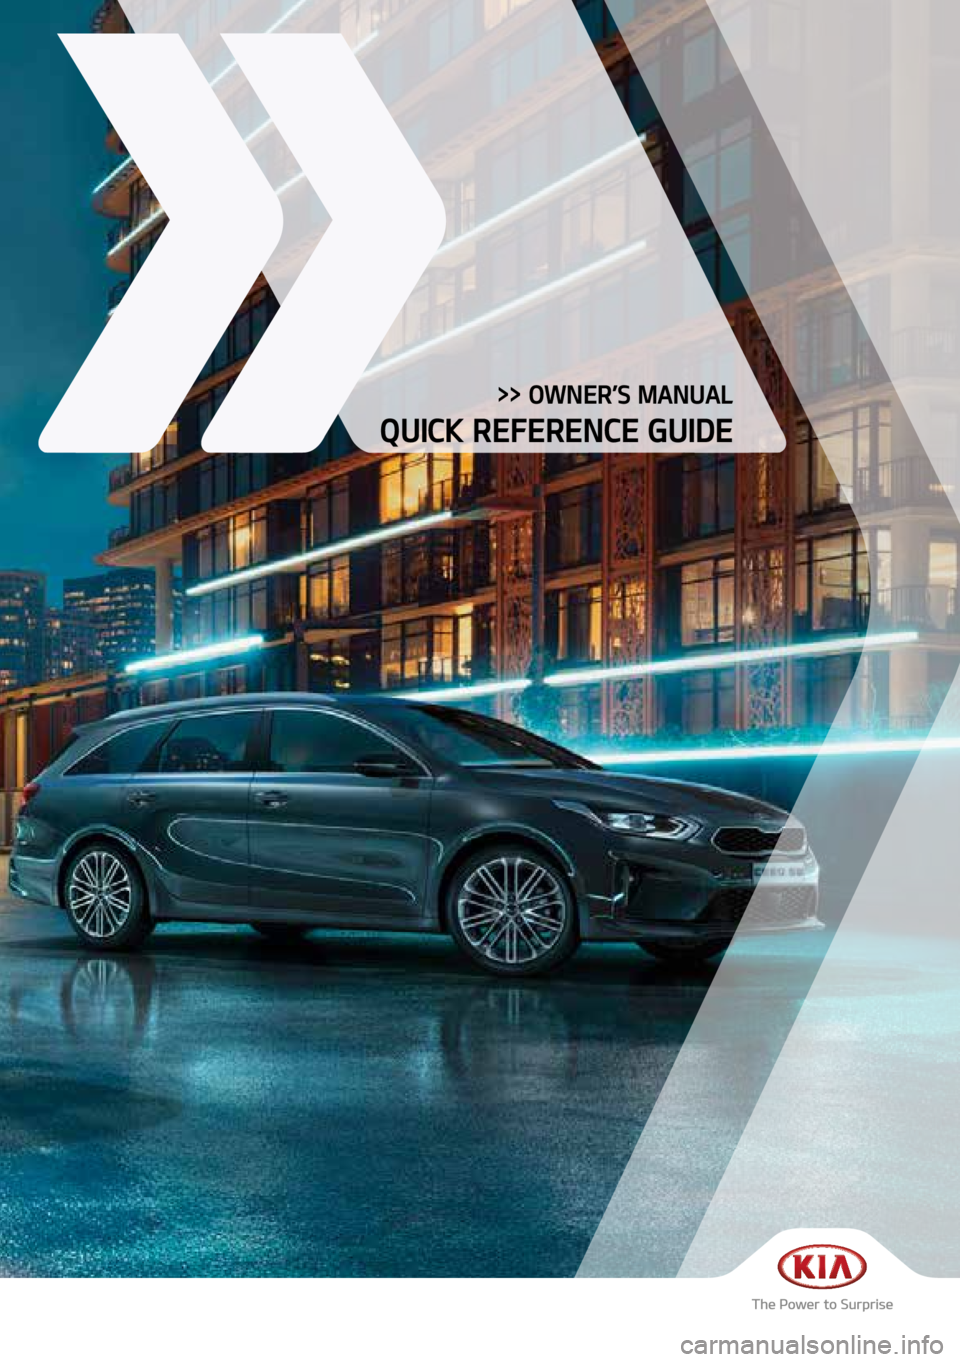 KIA CEED 2021  Owners Manual >> OWNER’S MANUAL
QUICK REFERENCE GUIDE     